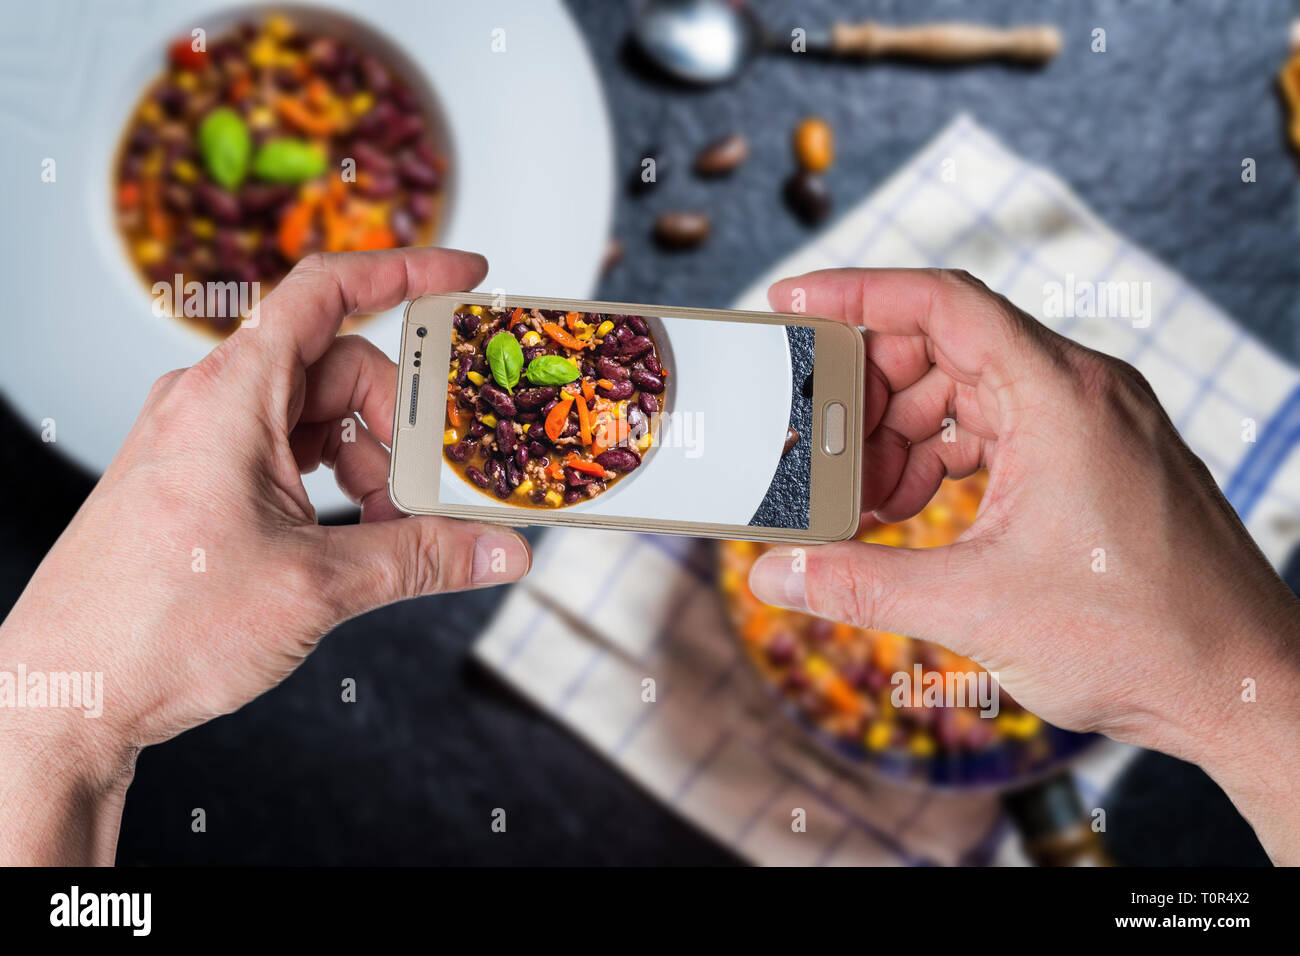 Man taking photo by smartphone of Chili or chilli corn carne. Cooked kidney bean, minced meat, chili, corn and pepper in white bowl  on black stone  t Stock Photo